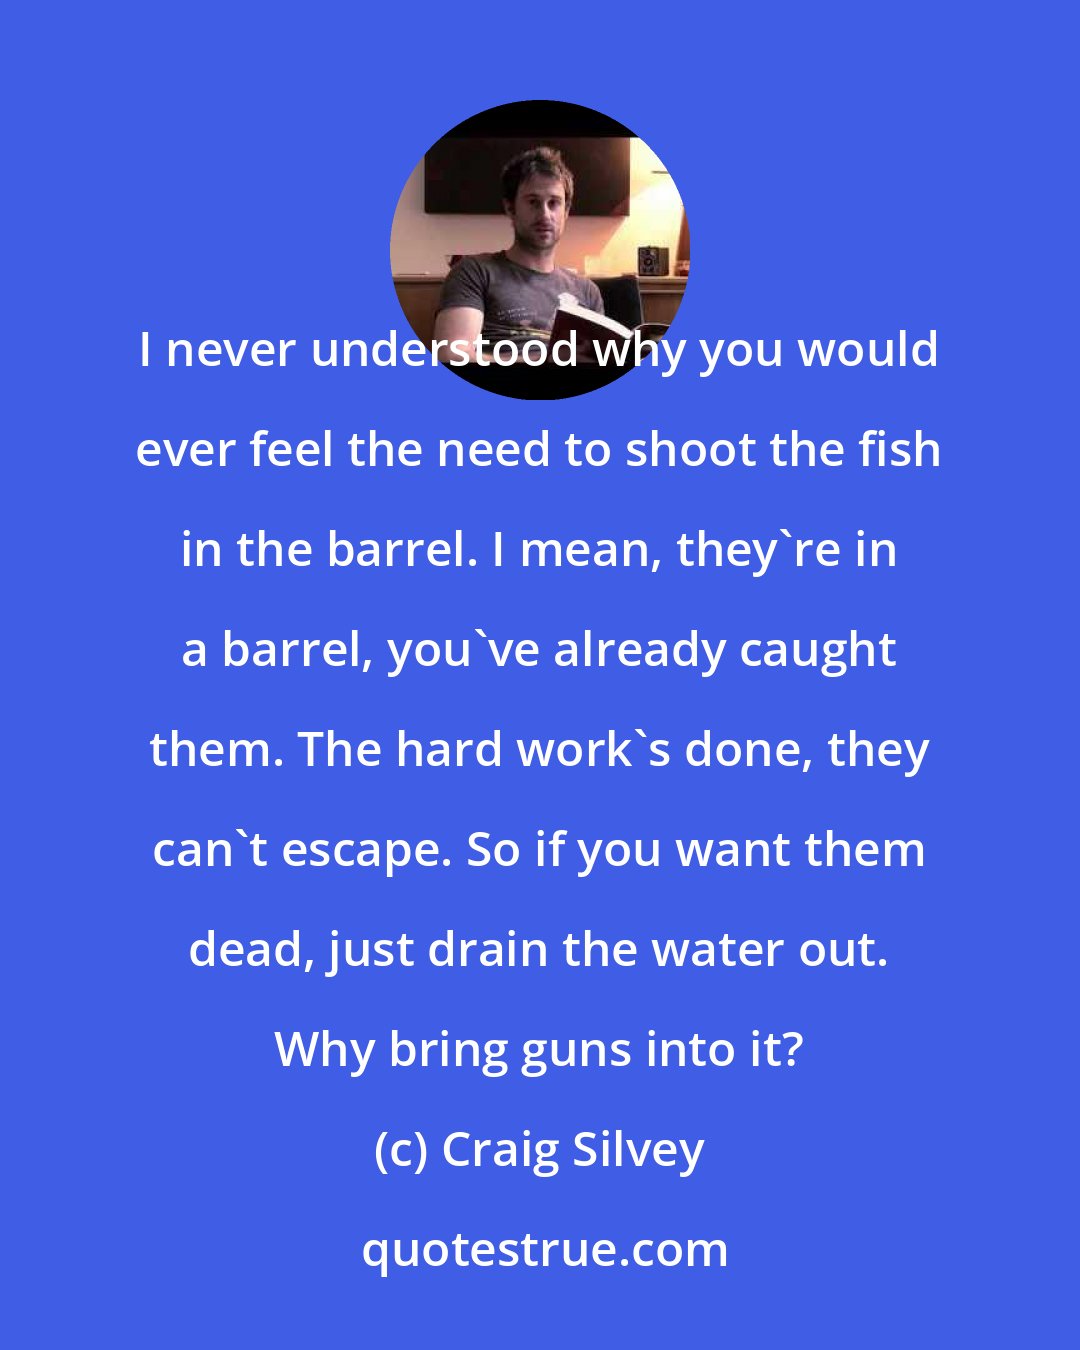 Craig Silvey: I never understood why you would ever feel the need to shoot the fish in the barrel. I mean, they're in a barrel, you've already caught them. The hard work's done, they can't escape. So if you want them dead, just drain the water out. Why bring guns into it?